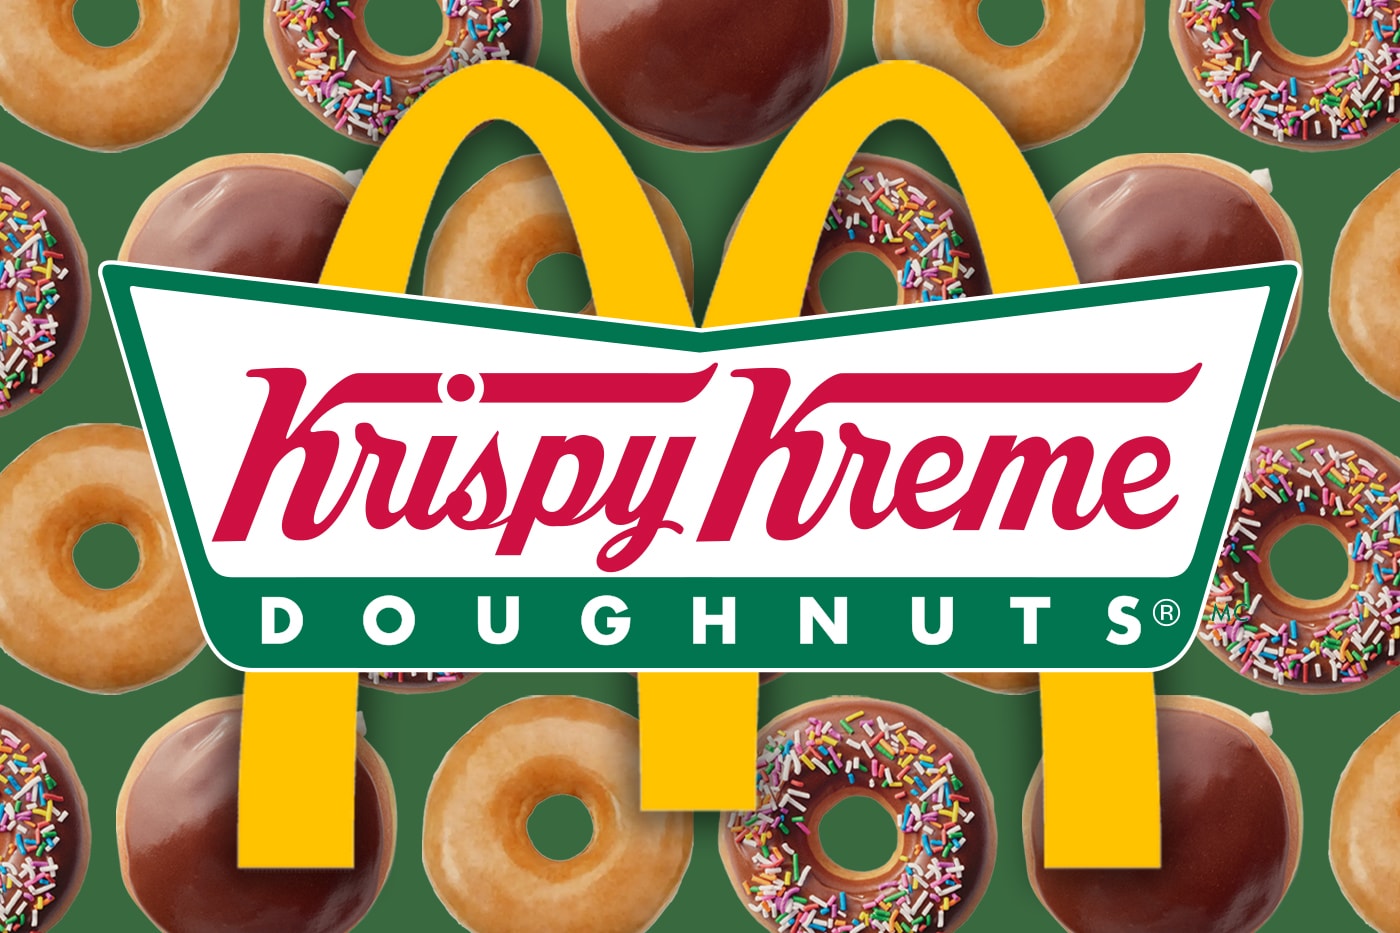 McDonald's To Sell Krispy Kreme Doughnuts Nationwide by the End of 2026 partnerships treats sweets original glazed doughnut chocalte iced sprinkles doughnut chocolate iced kreme filled doughnu